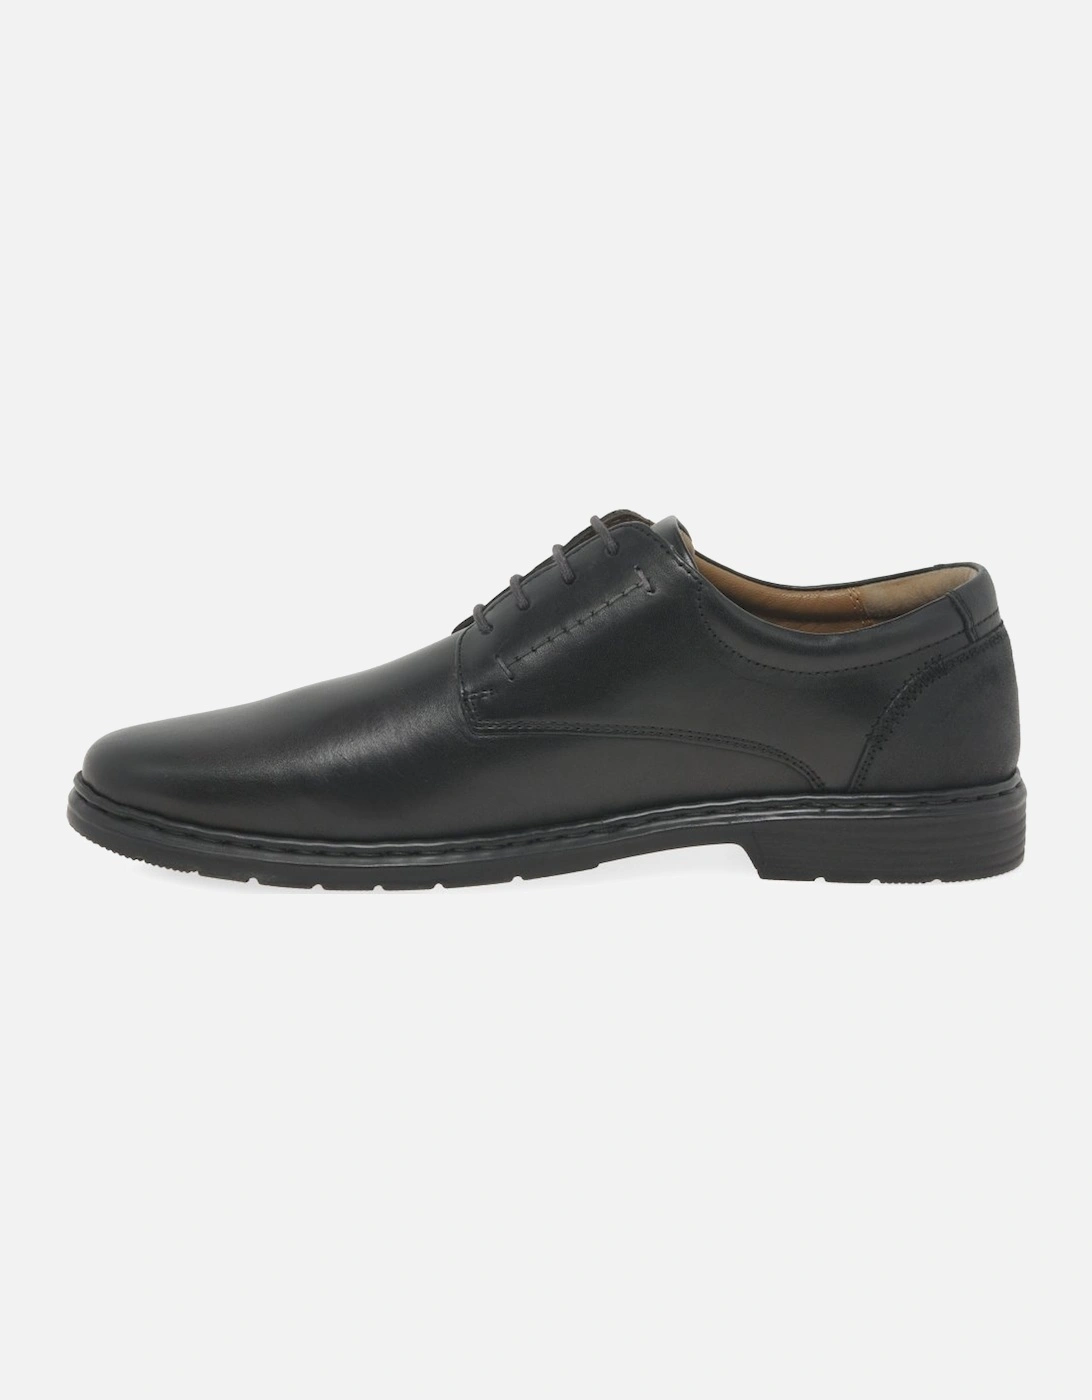 Alastair 01 Mens Formal Lace Up Shoes